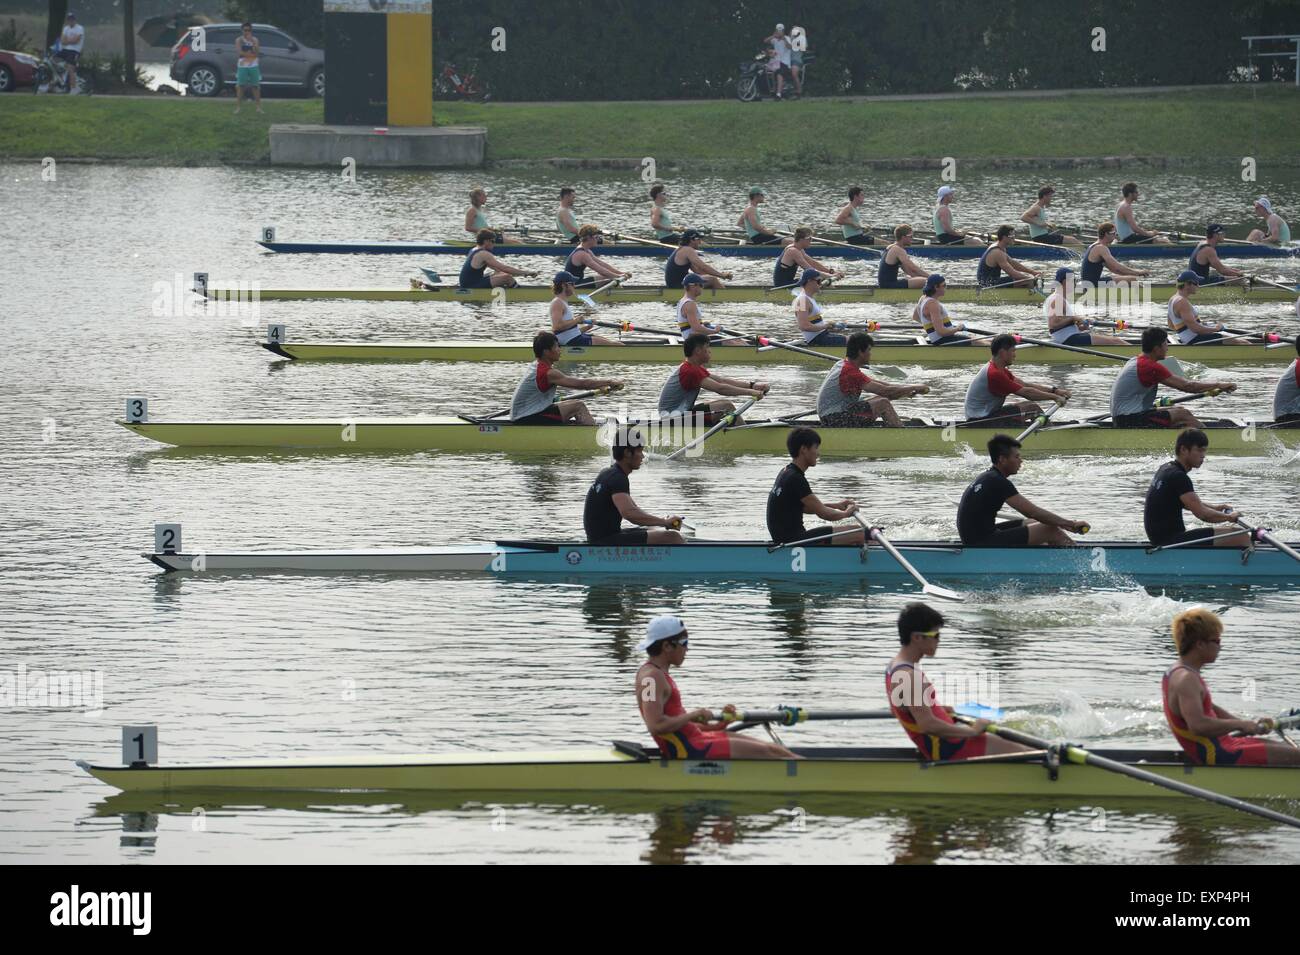 Shanghai, China. 15th July, 2015. Participants compete during Huangpu River World Famous University Boat Race in Shanghai, east China, July 15, 2015. A total of 12 teams, including Oxford, Cambridge and Yale, took part in the race. Shanghai Jiaotong University claimed the title. © Liu Xiaojing/Xinhua/Alamy Live News Stock Photo